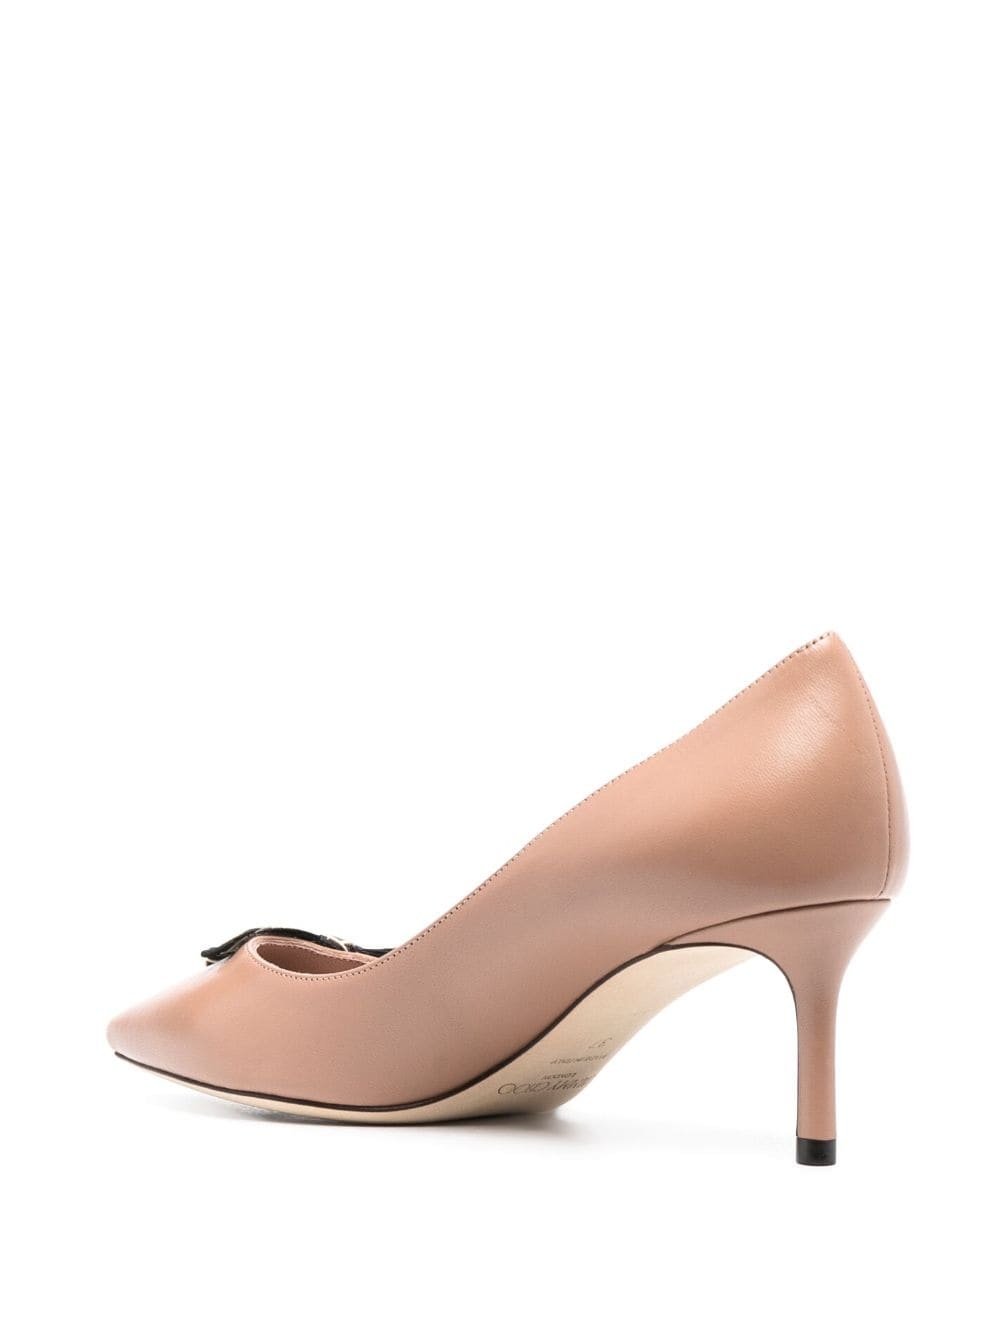 Romy 60mm leather pumps - 3